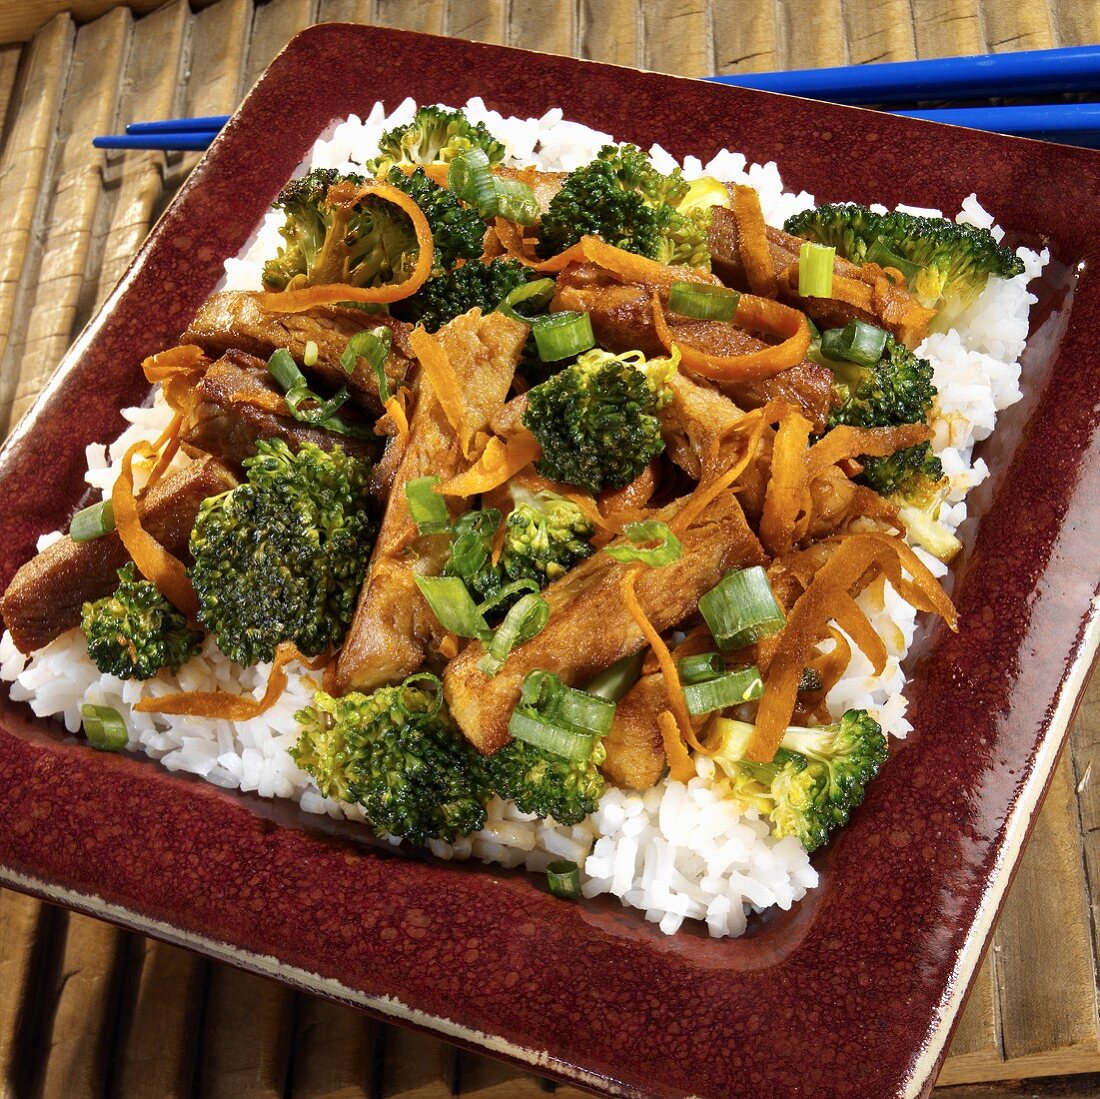 Strips of pork with broccoli on rice